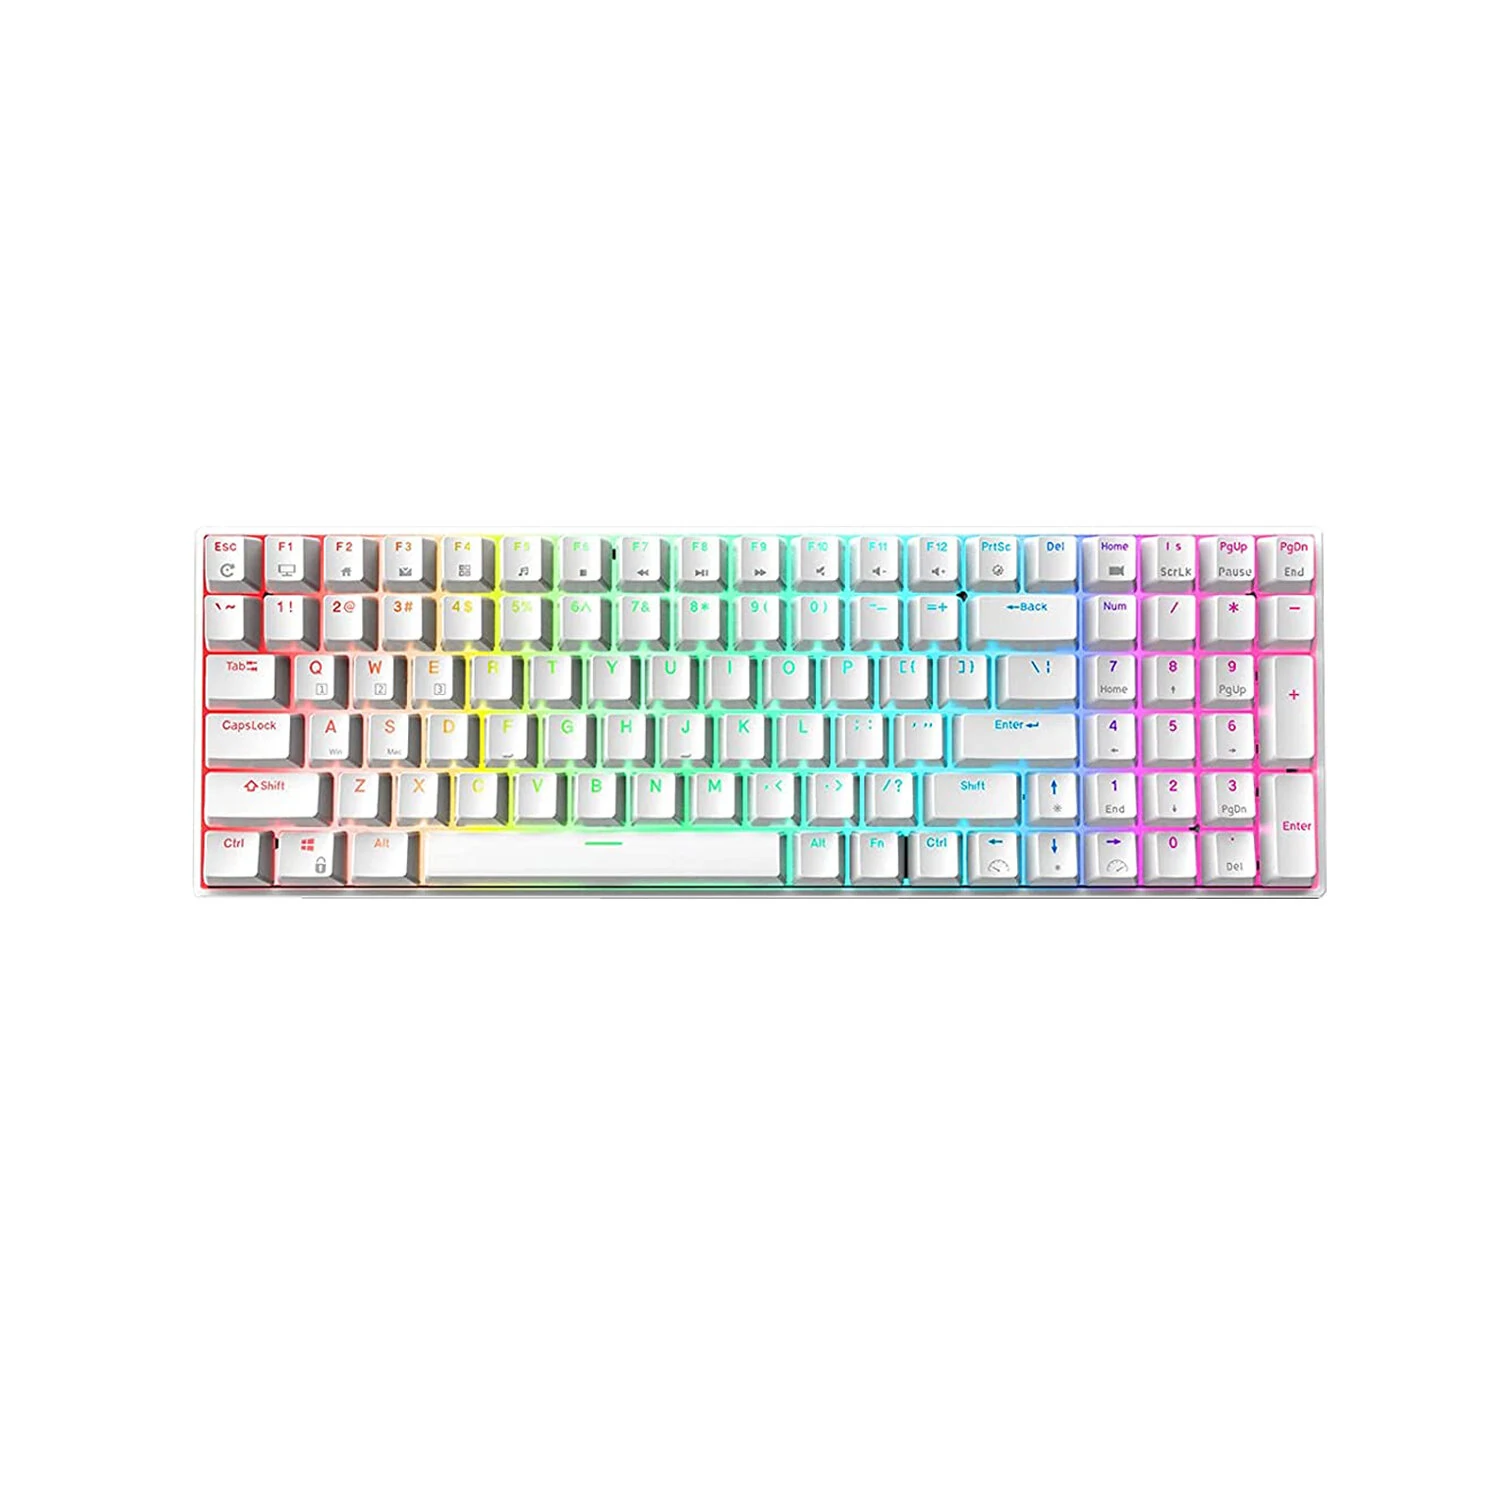 Royal Kludge RK100 Mechanical Keyboard 100 Keys Triple Mode Wireless bluetooth5.0 + 2.4Ghz + Type-C Wired Hot-swappable RK Switch USB Hub Rechargeable RGB Backlit Gaming Keyboard - White Brown Switch